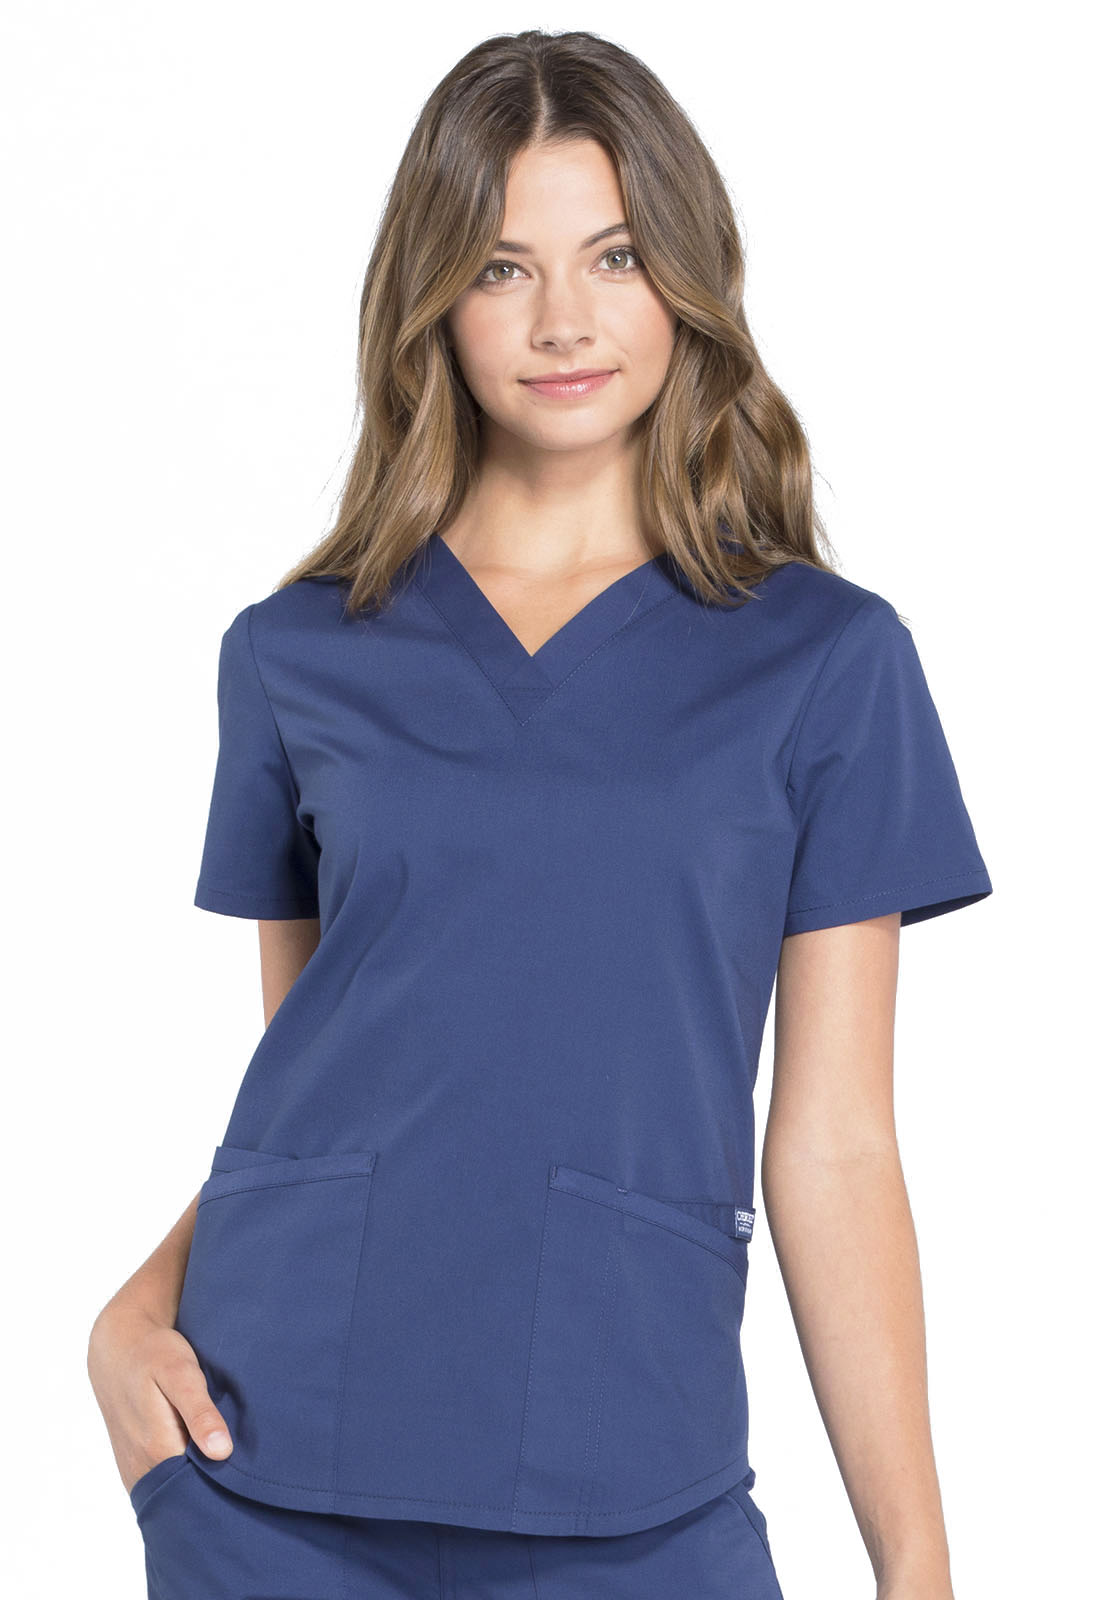 Details about   Scrubs Cherokee Workwear Professionals V Neck Top WW665 BLK Black Free Shipping 